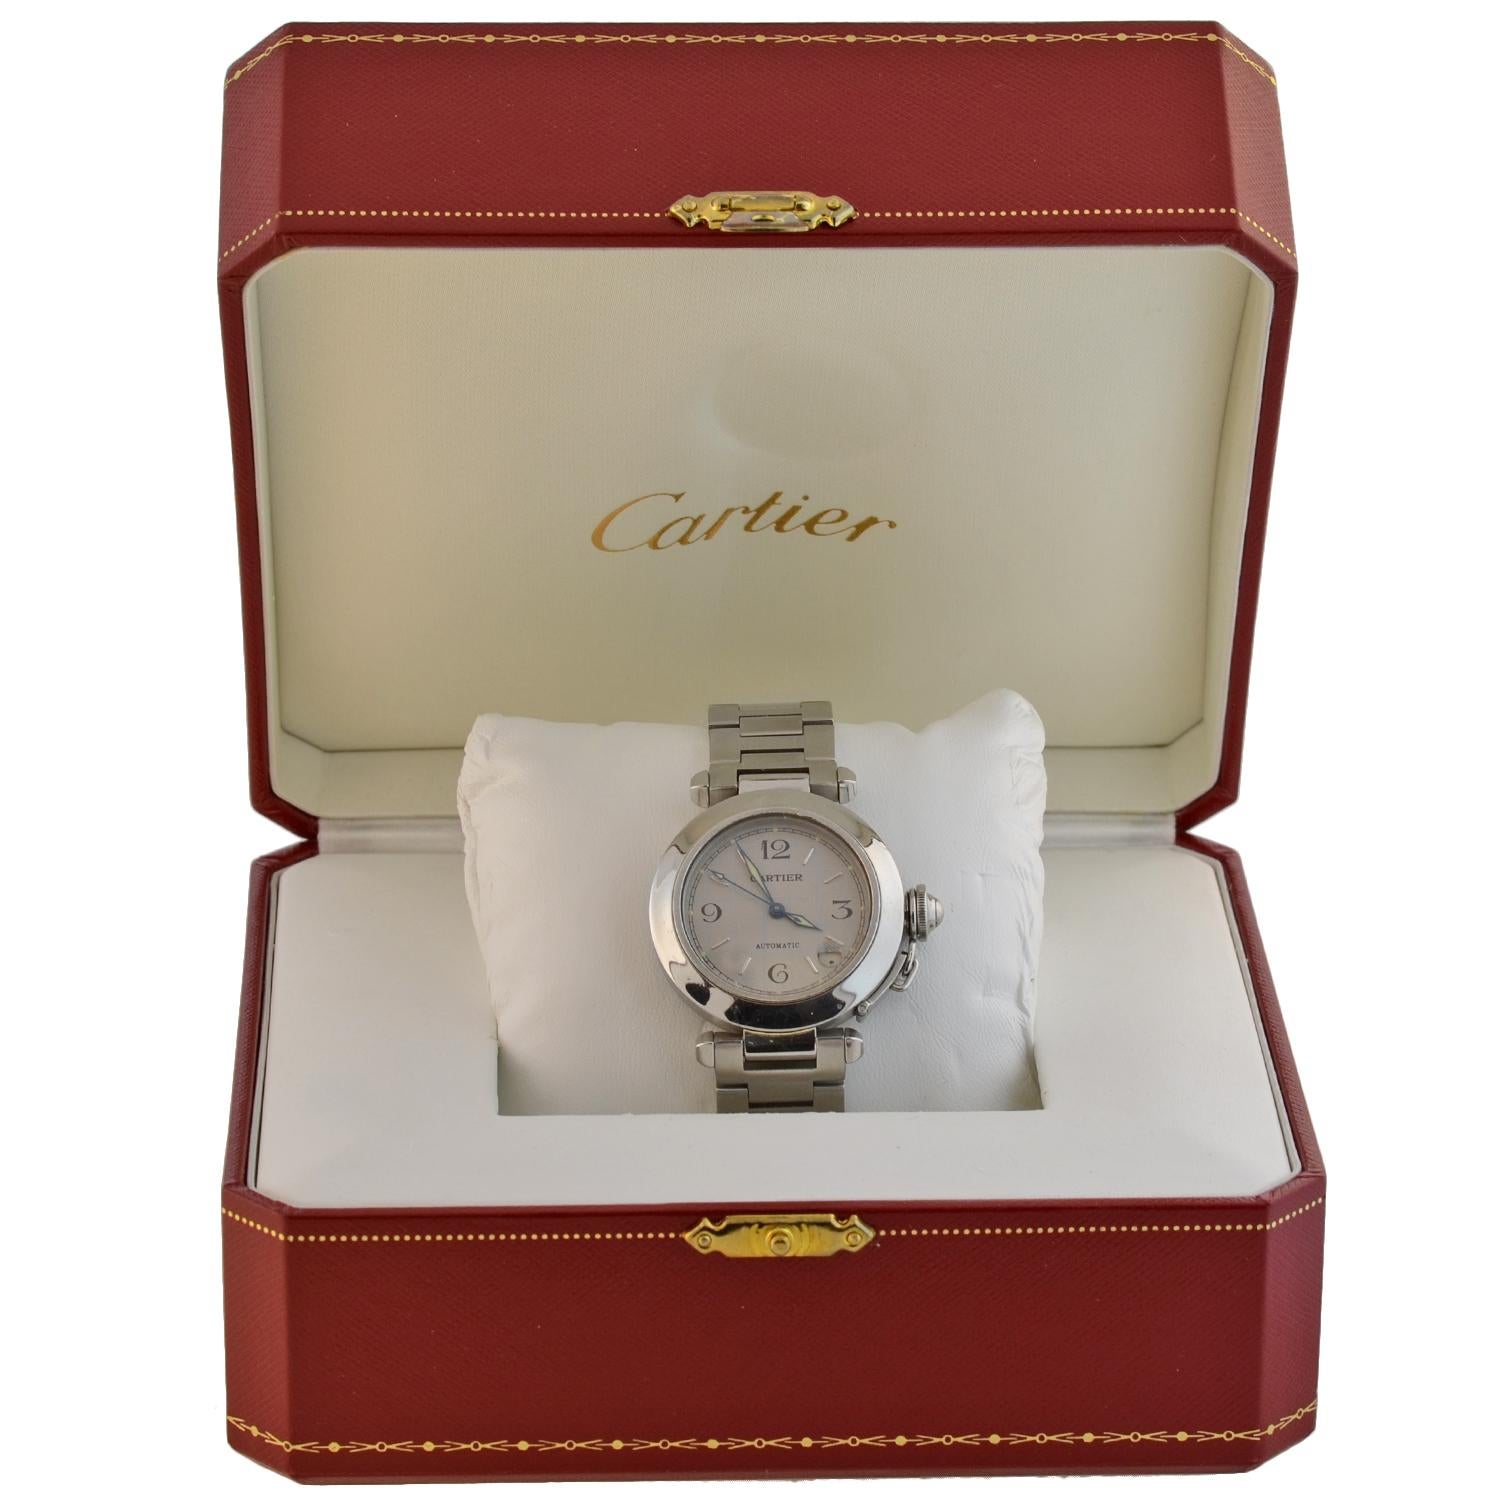 A fabulous Estate CARTIER automatic watch! This gorgeous timepiece is made of stainless steel and is one of Cartier's most beautiful styles, the 